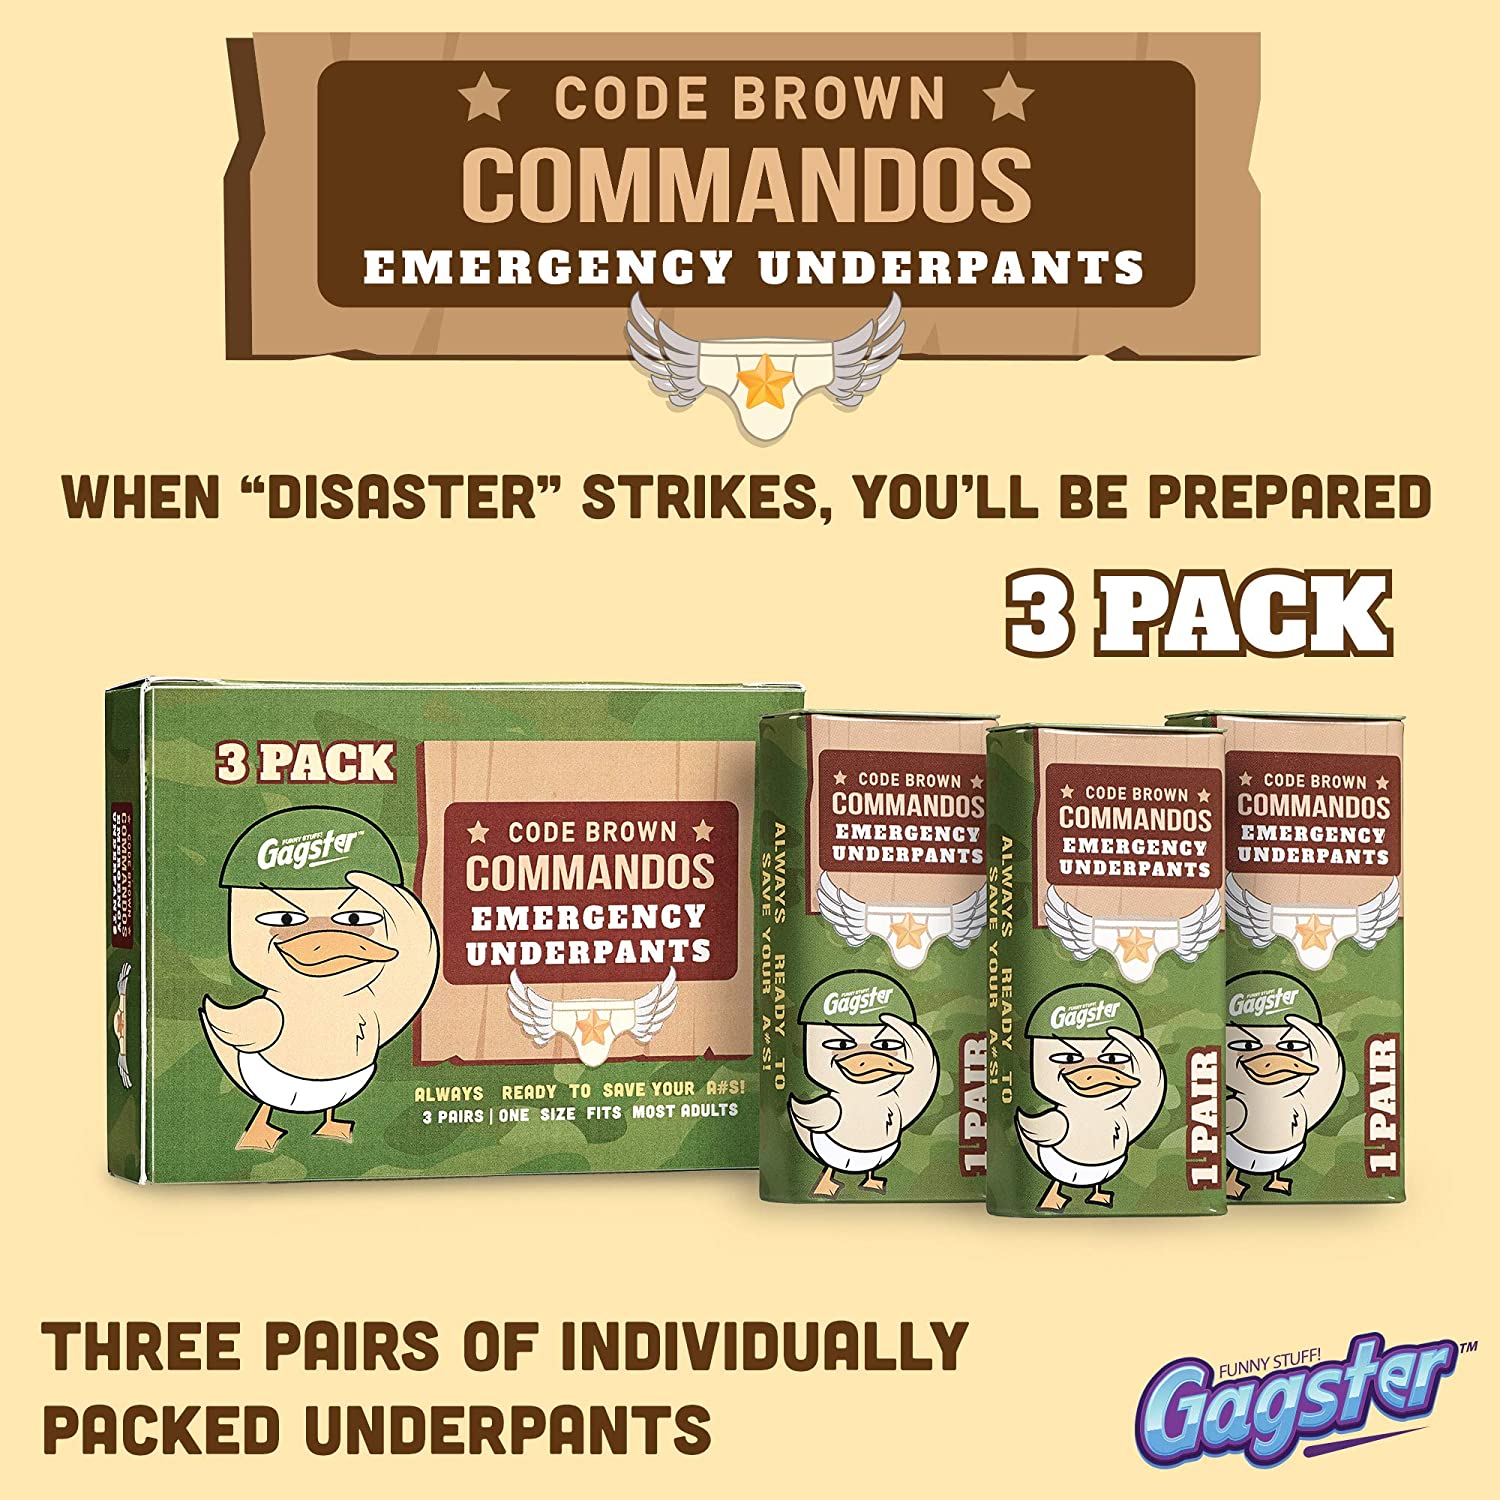 Gagster Code Brown Commandos Emergency Underpants in a Can (3 Pairs) |  Instant Undies Make a Terrific White Elephant Gag Gift | Funny Party Goods  